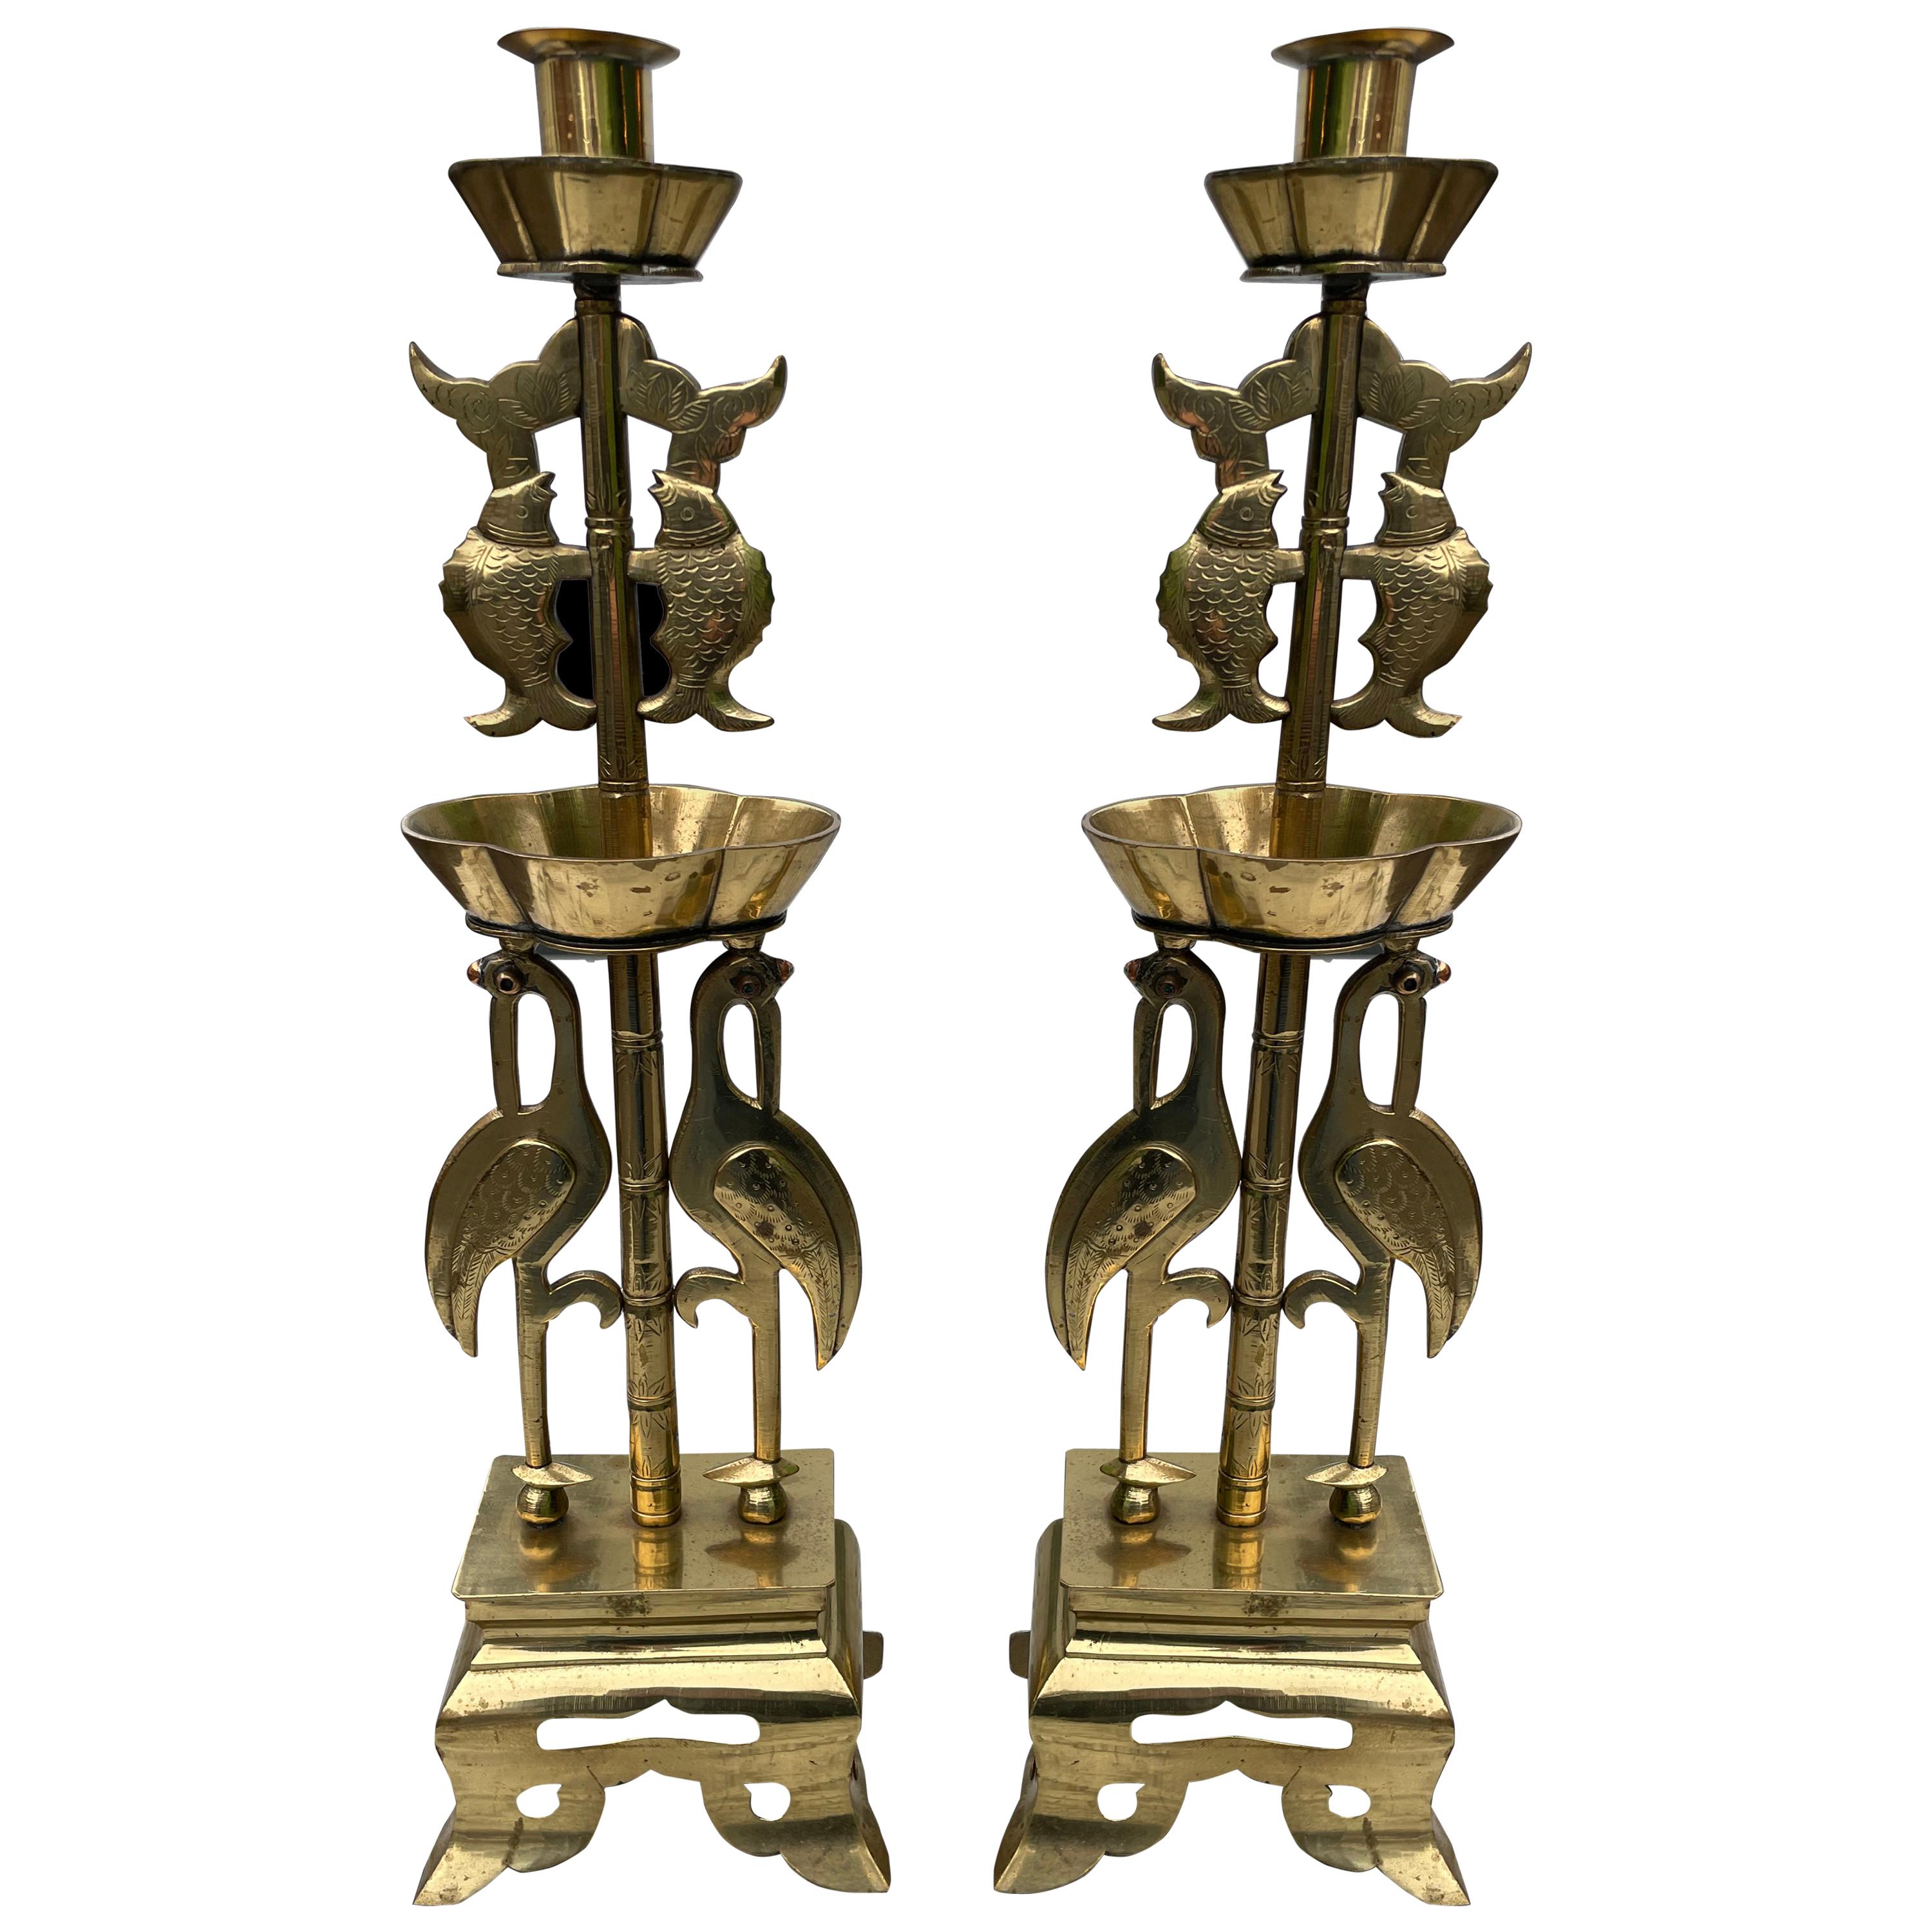 Pair of Solid Brass Oriental Arts & Crafts Style Candlesticks, 20th Century For Sale